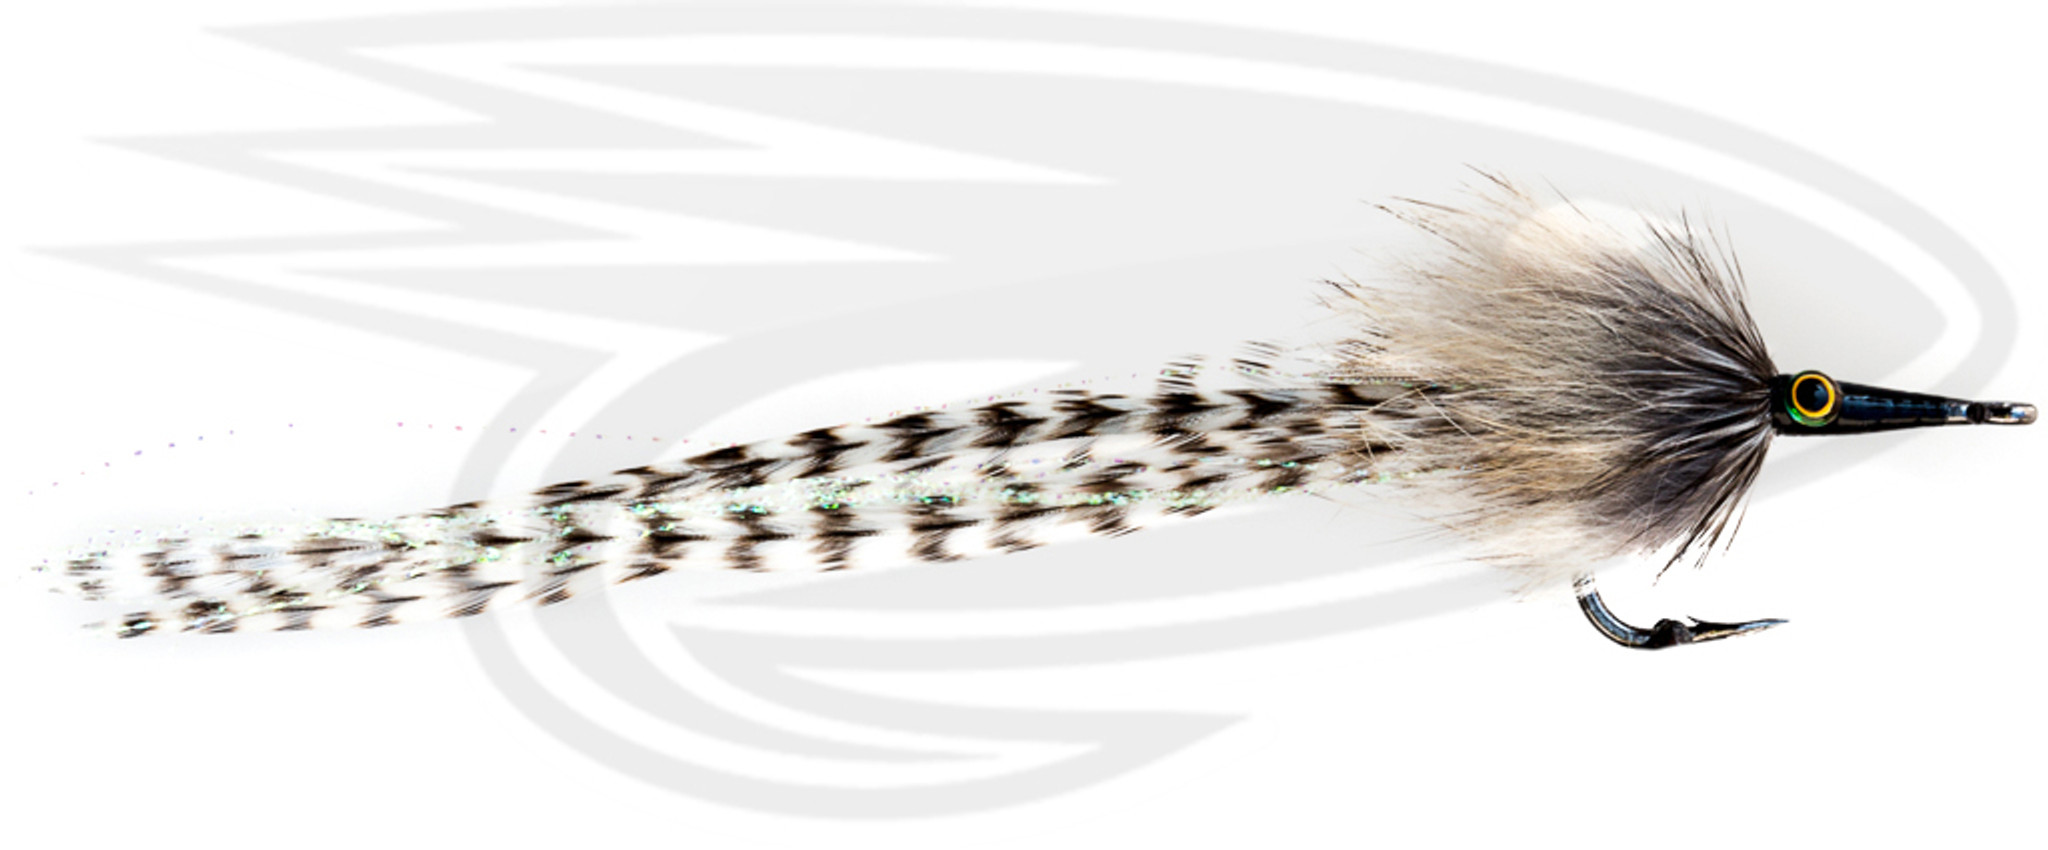 Cockroach Tarpon Fly - Saltwater Fly Patterns